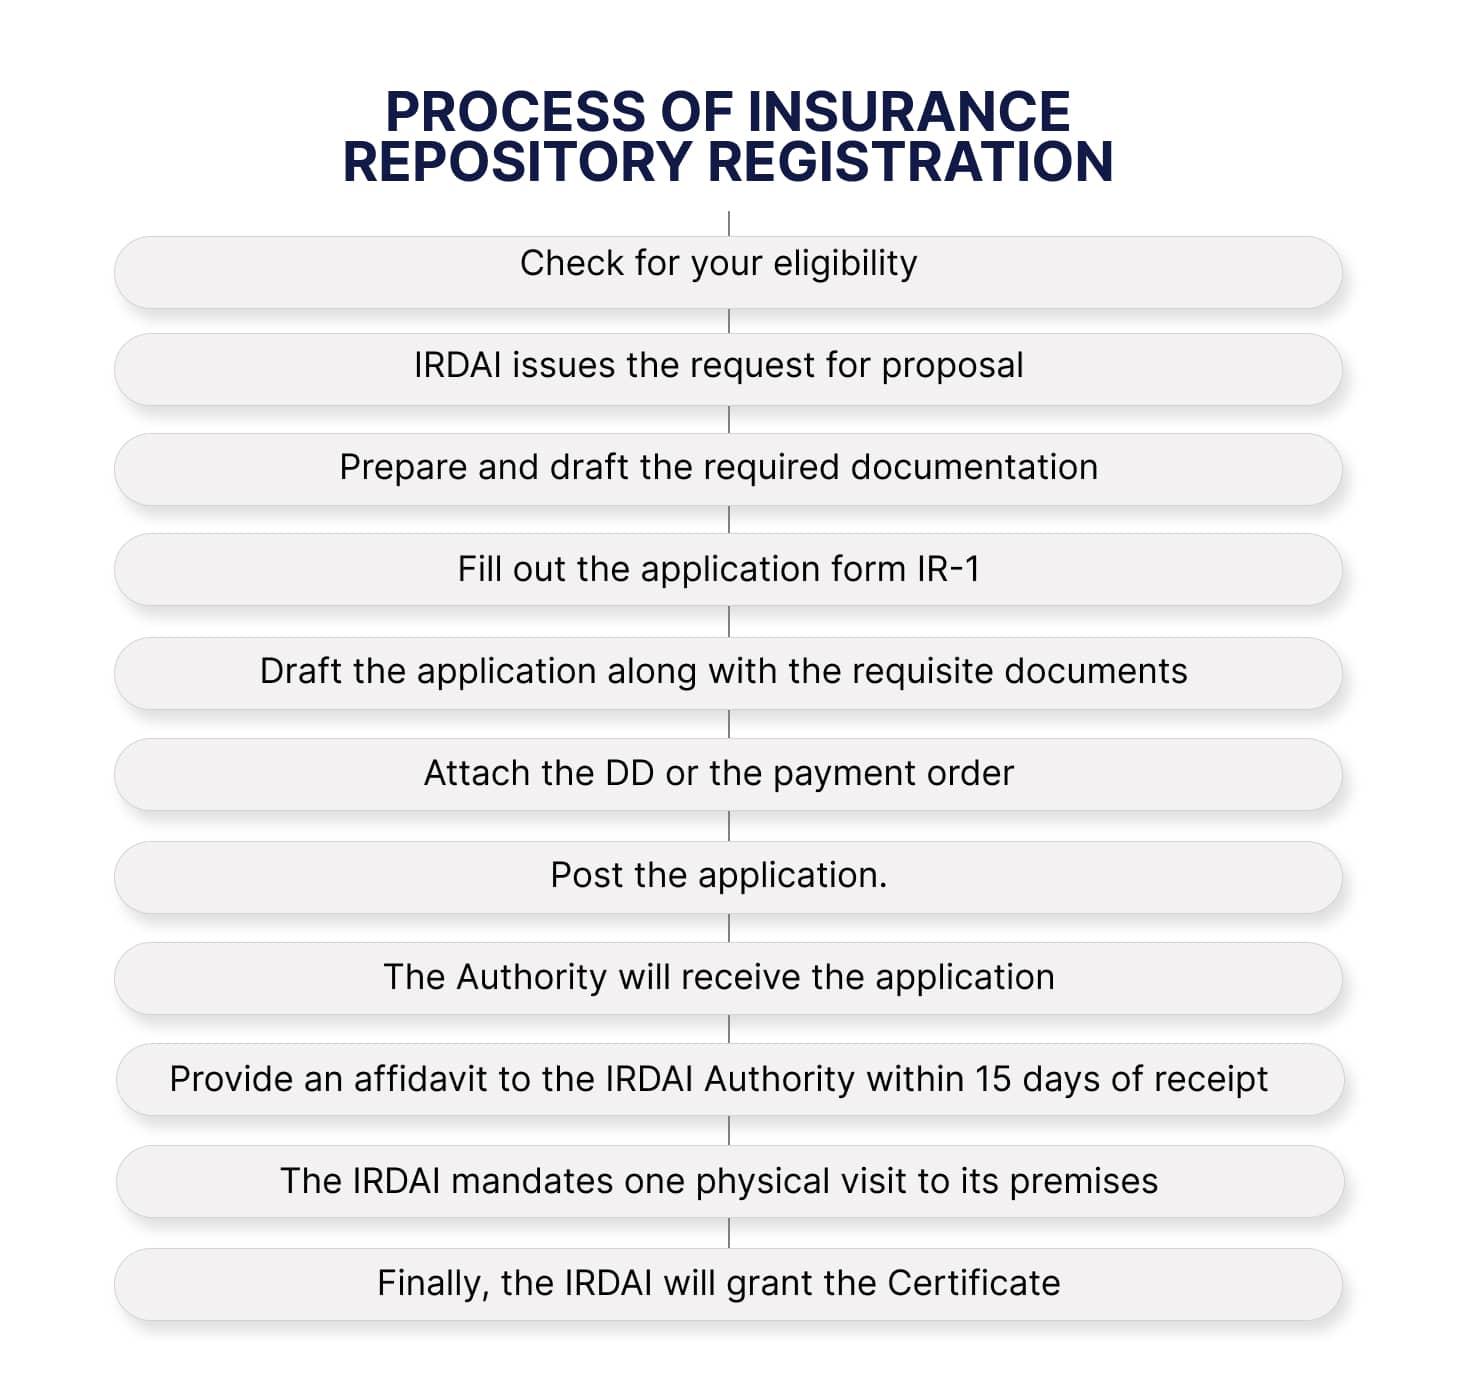 Process of Insurance Repository Registration in India